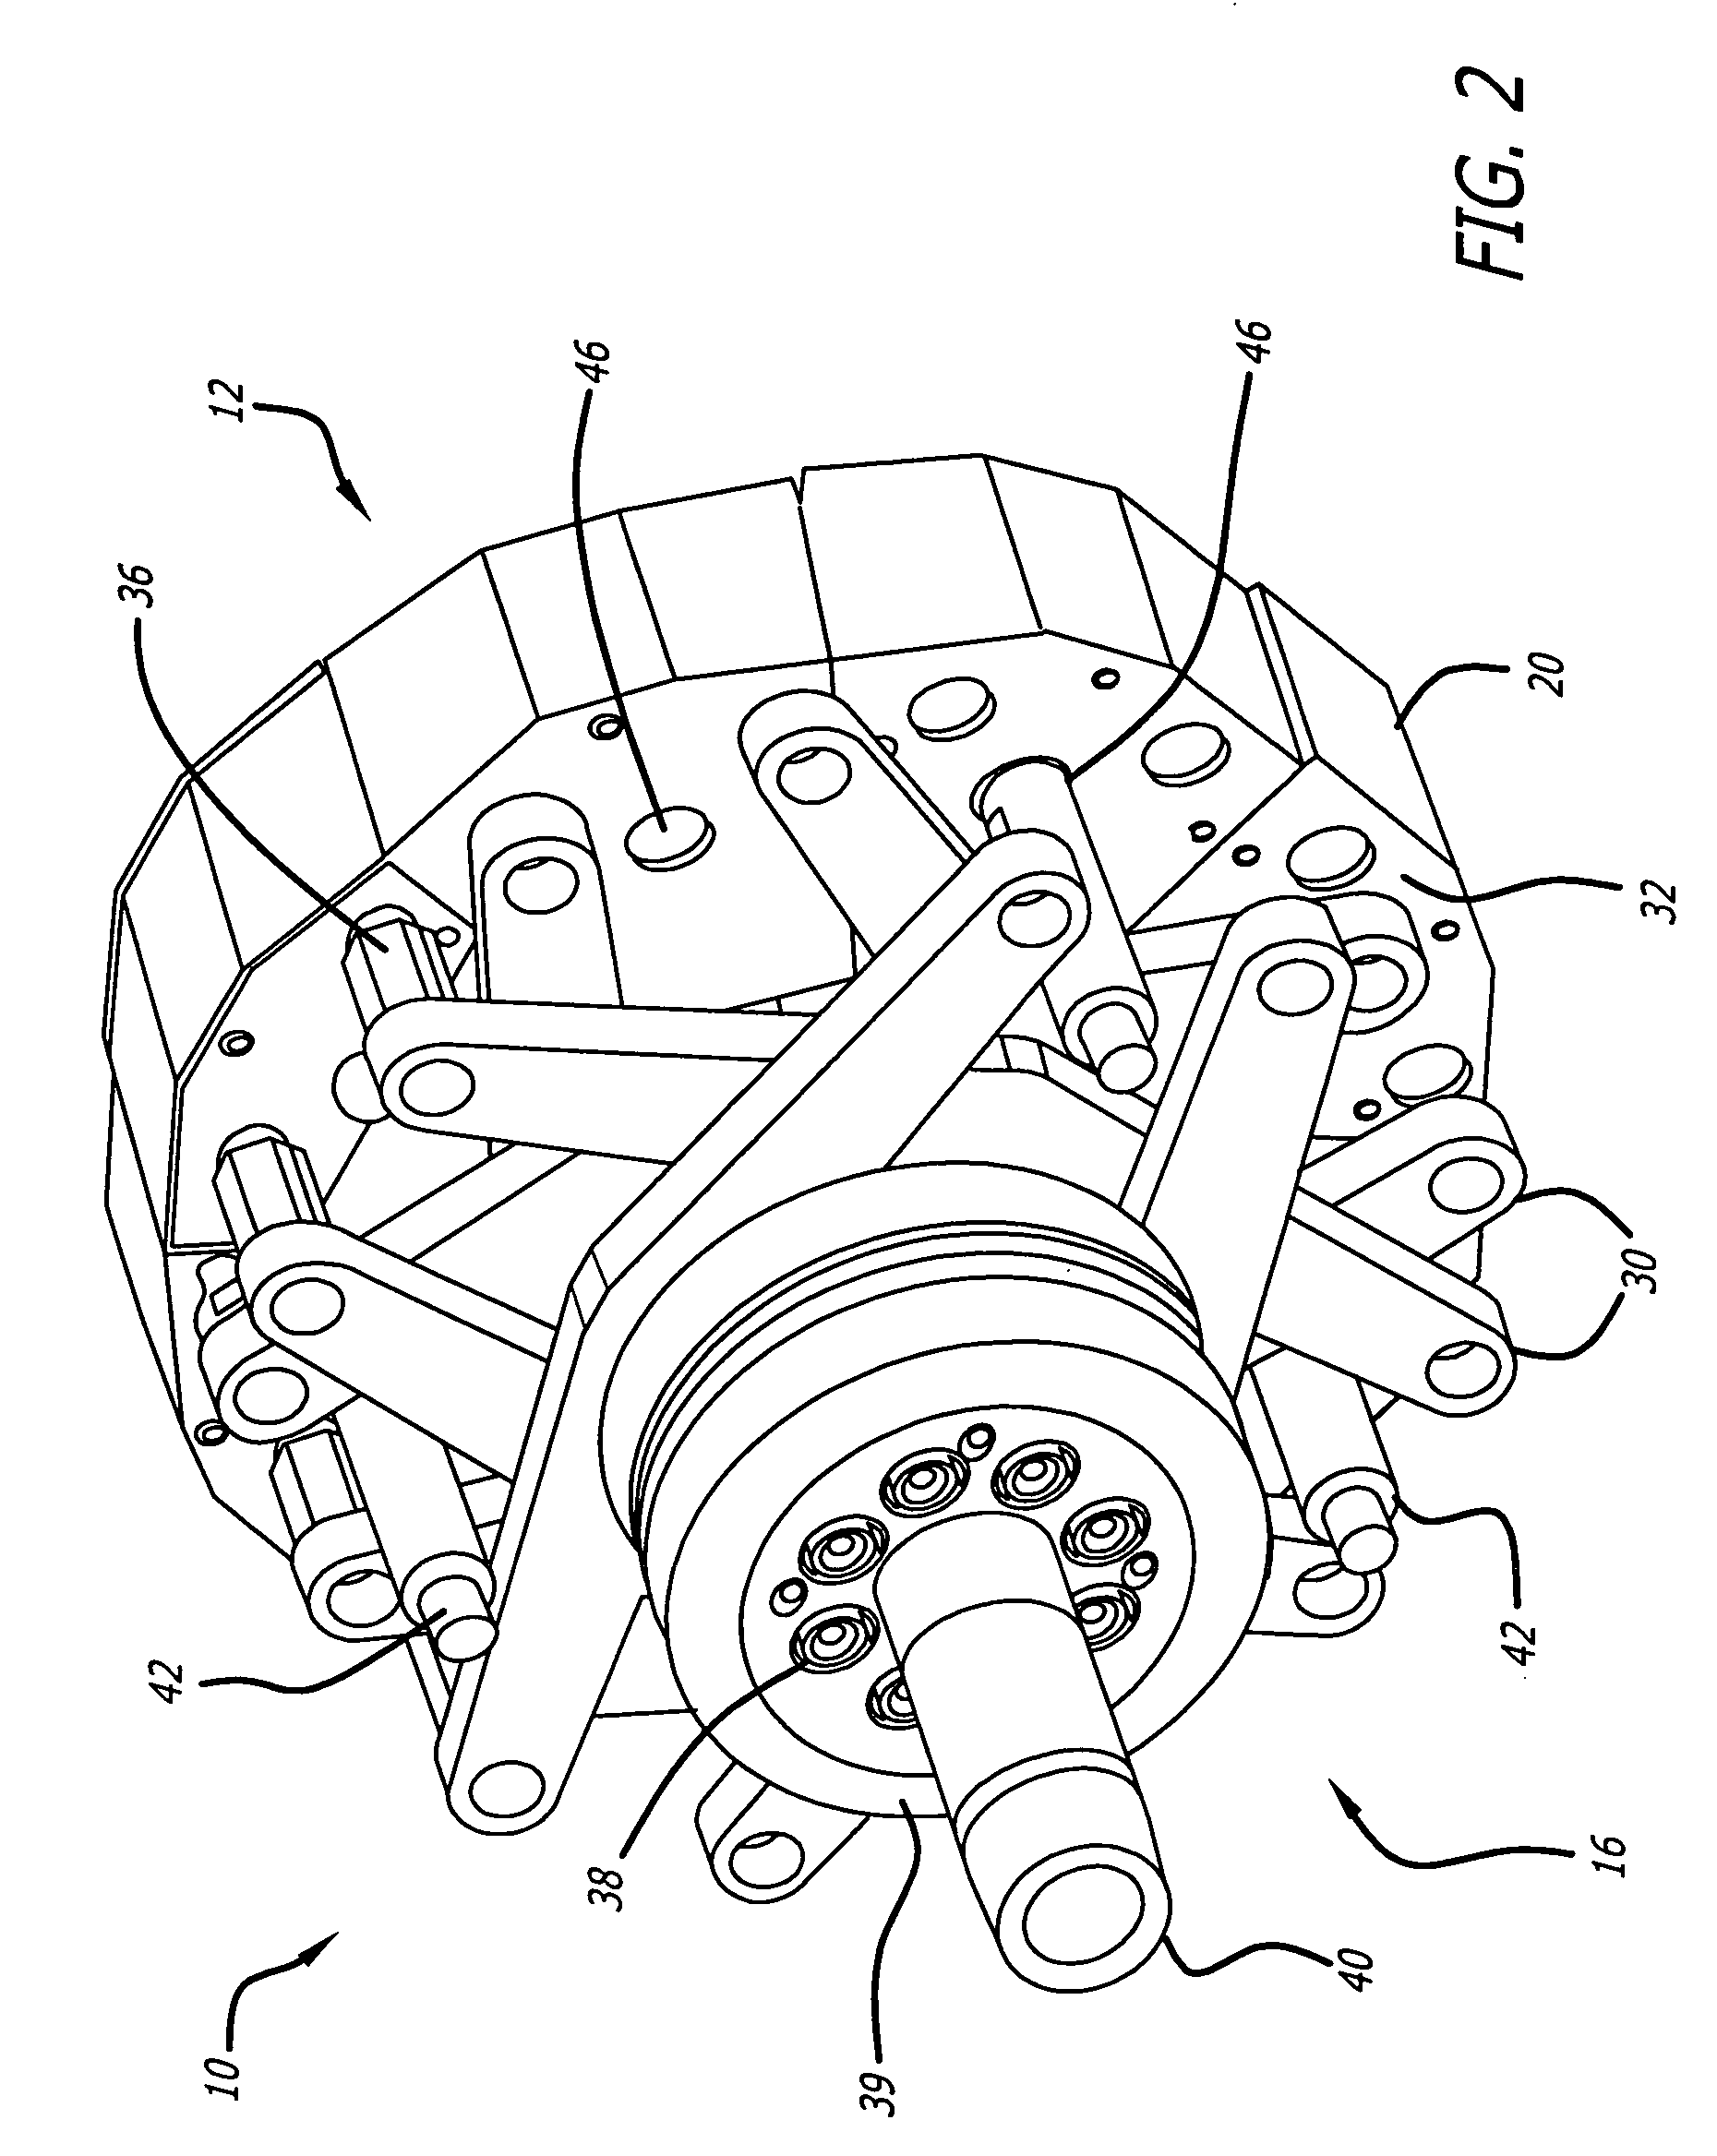 Assembly for crimping an intraluminal device and method of use